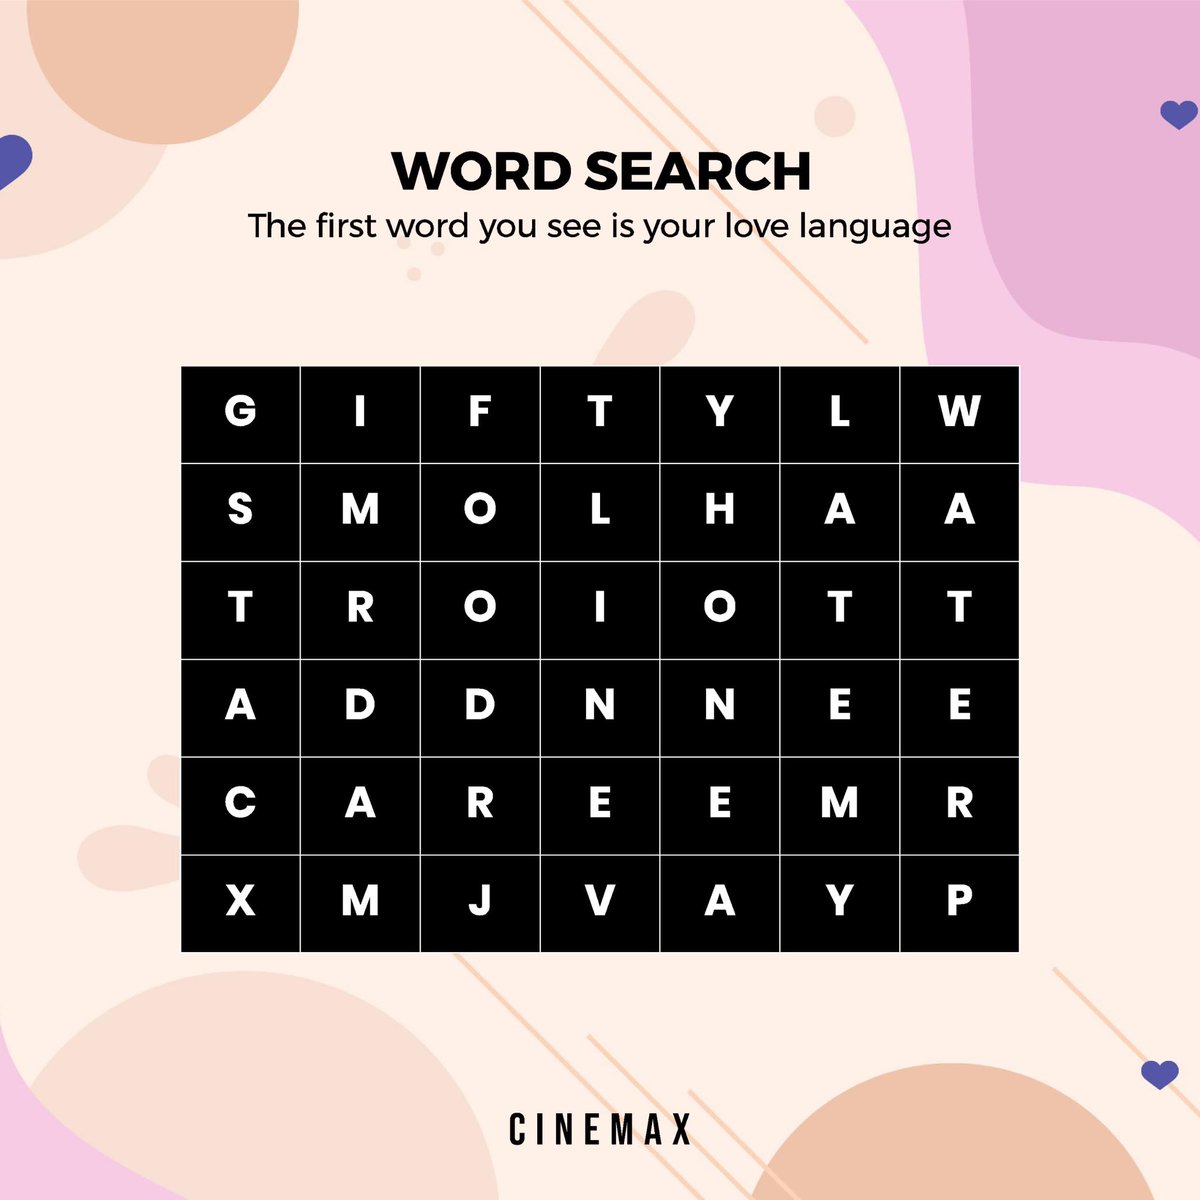 Find out what your love language is 😜 The first word you see is your love language 😁 Don’t stop the fun, share your comment and tag your friends 😙 . . #cinemaxdr #cinemaxng #justforfun